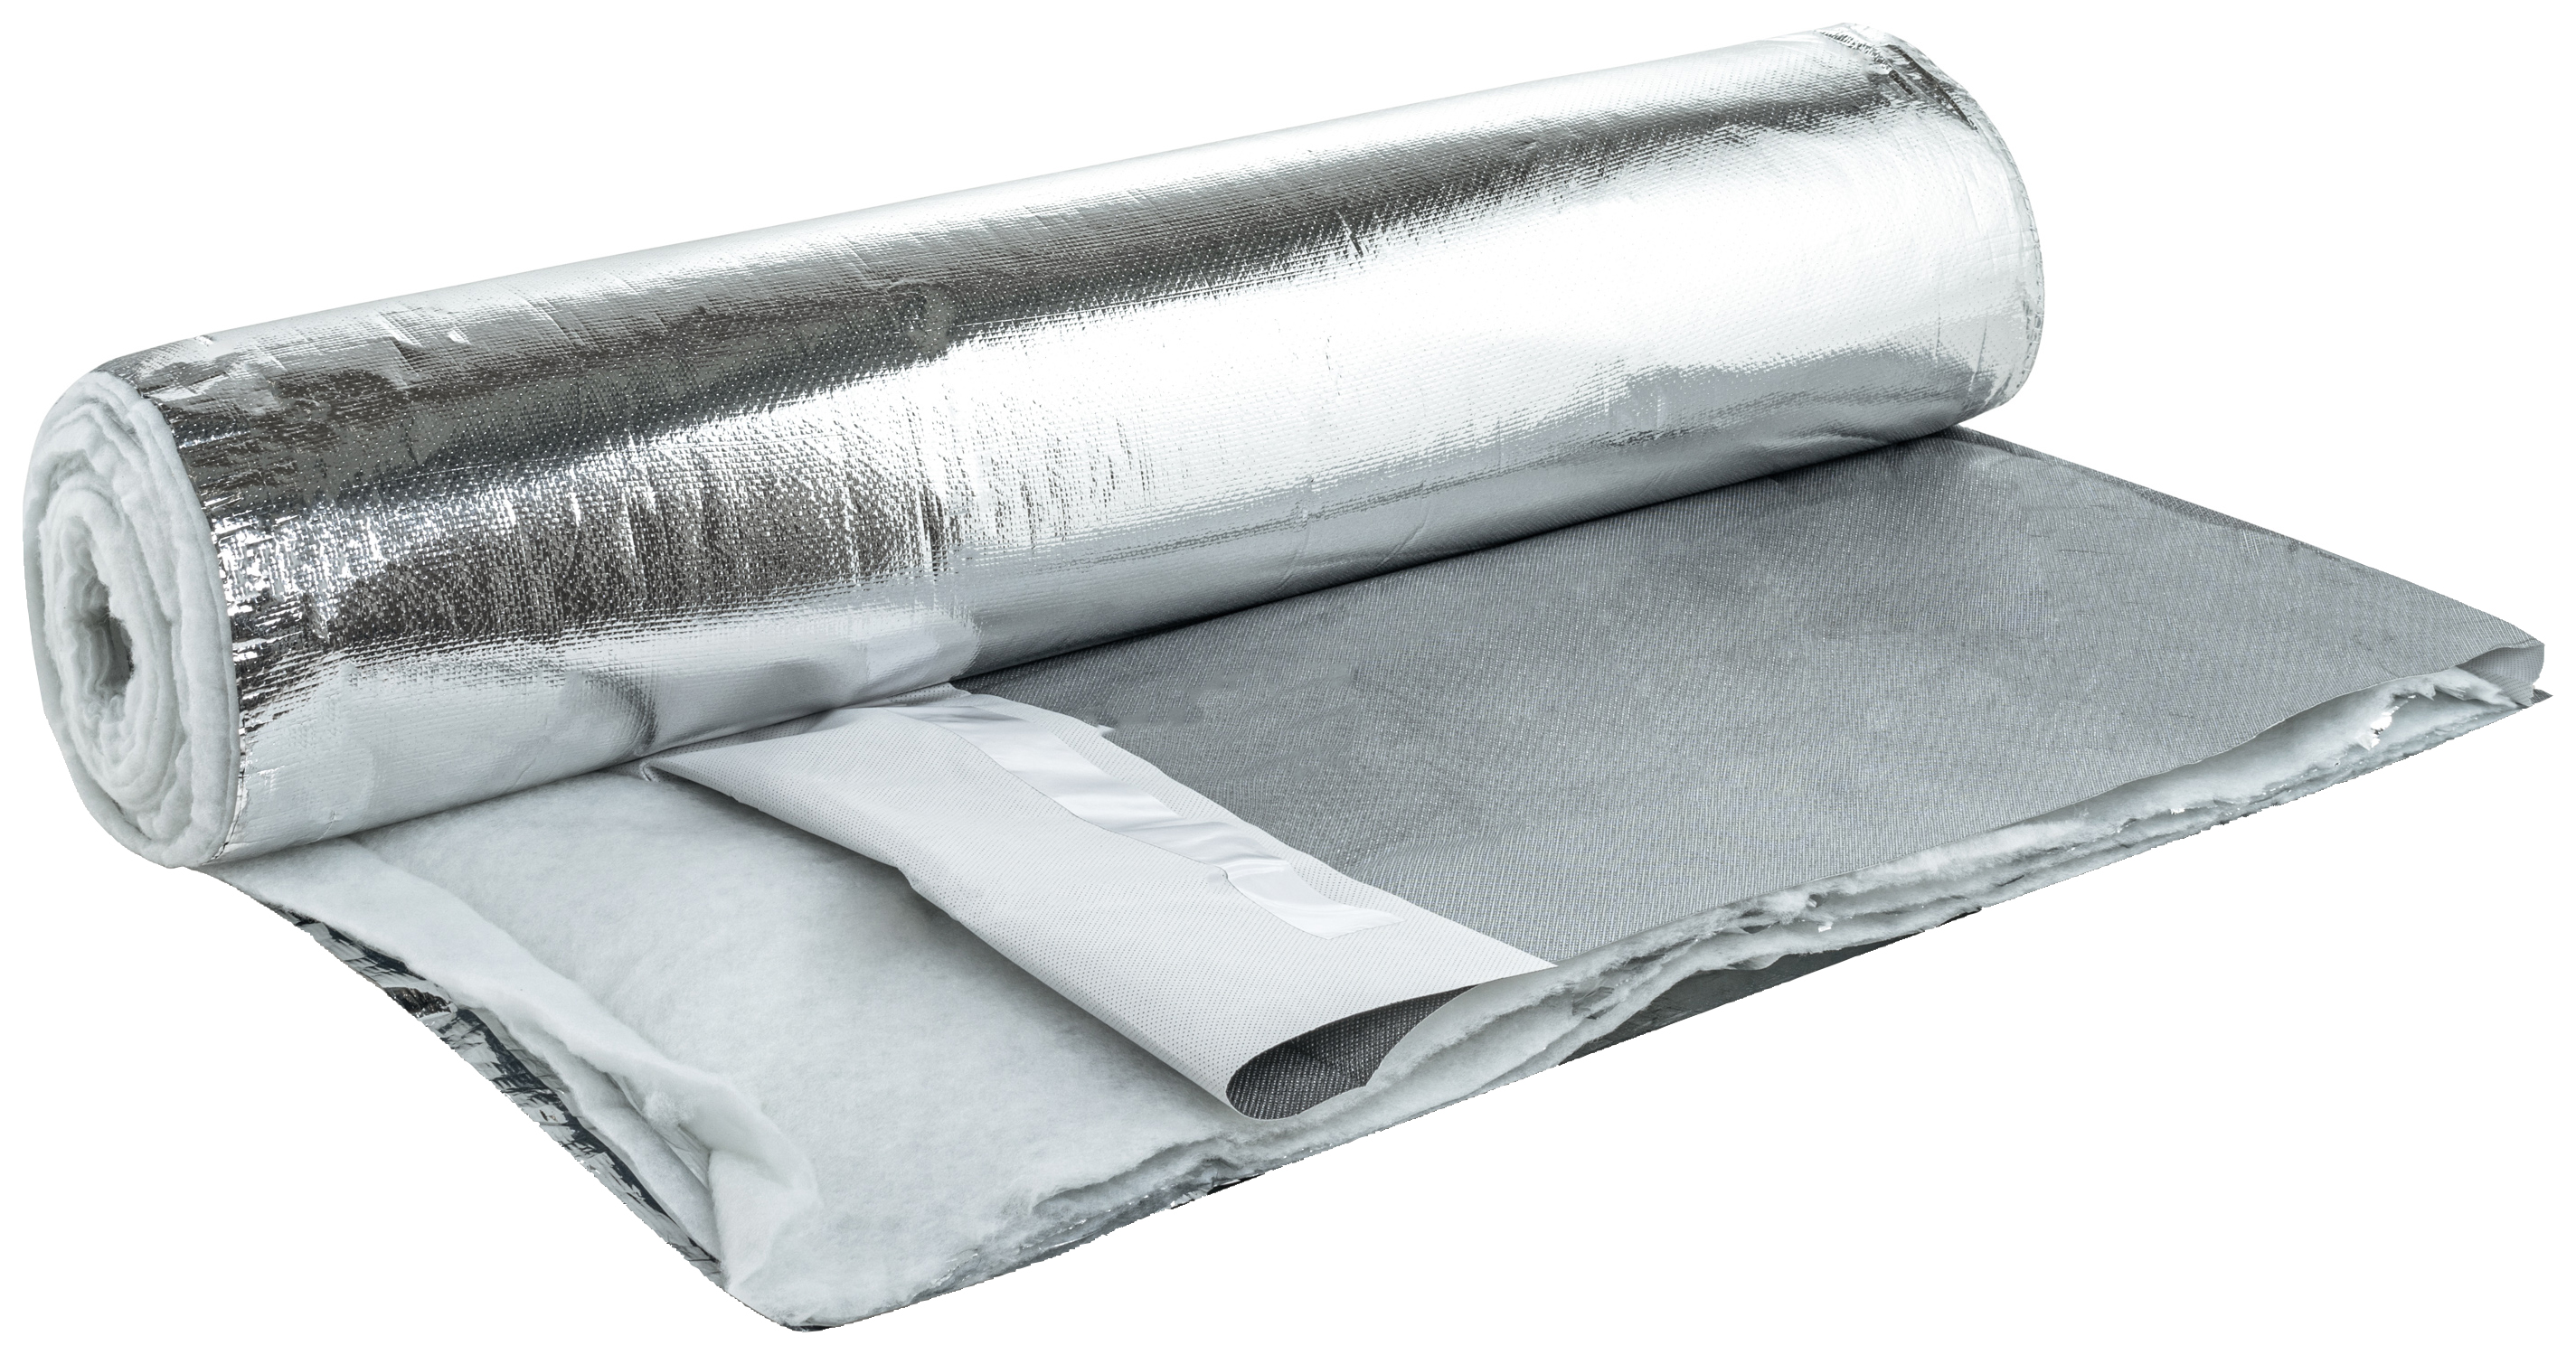 SuperFOIL SF19BB Breathable Multifoil Insulation - 1.2 x 10m